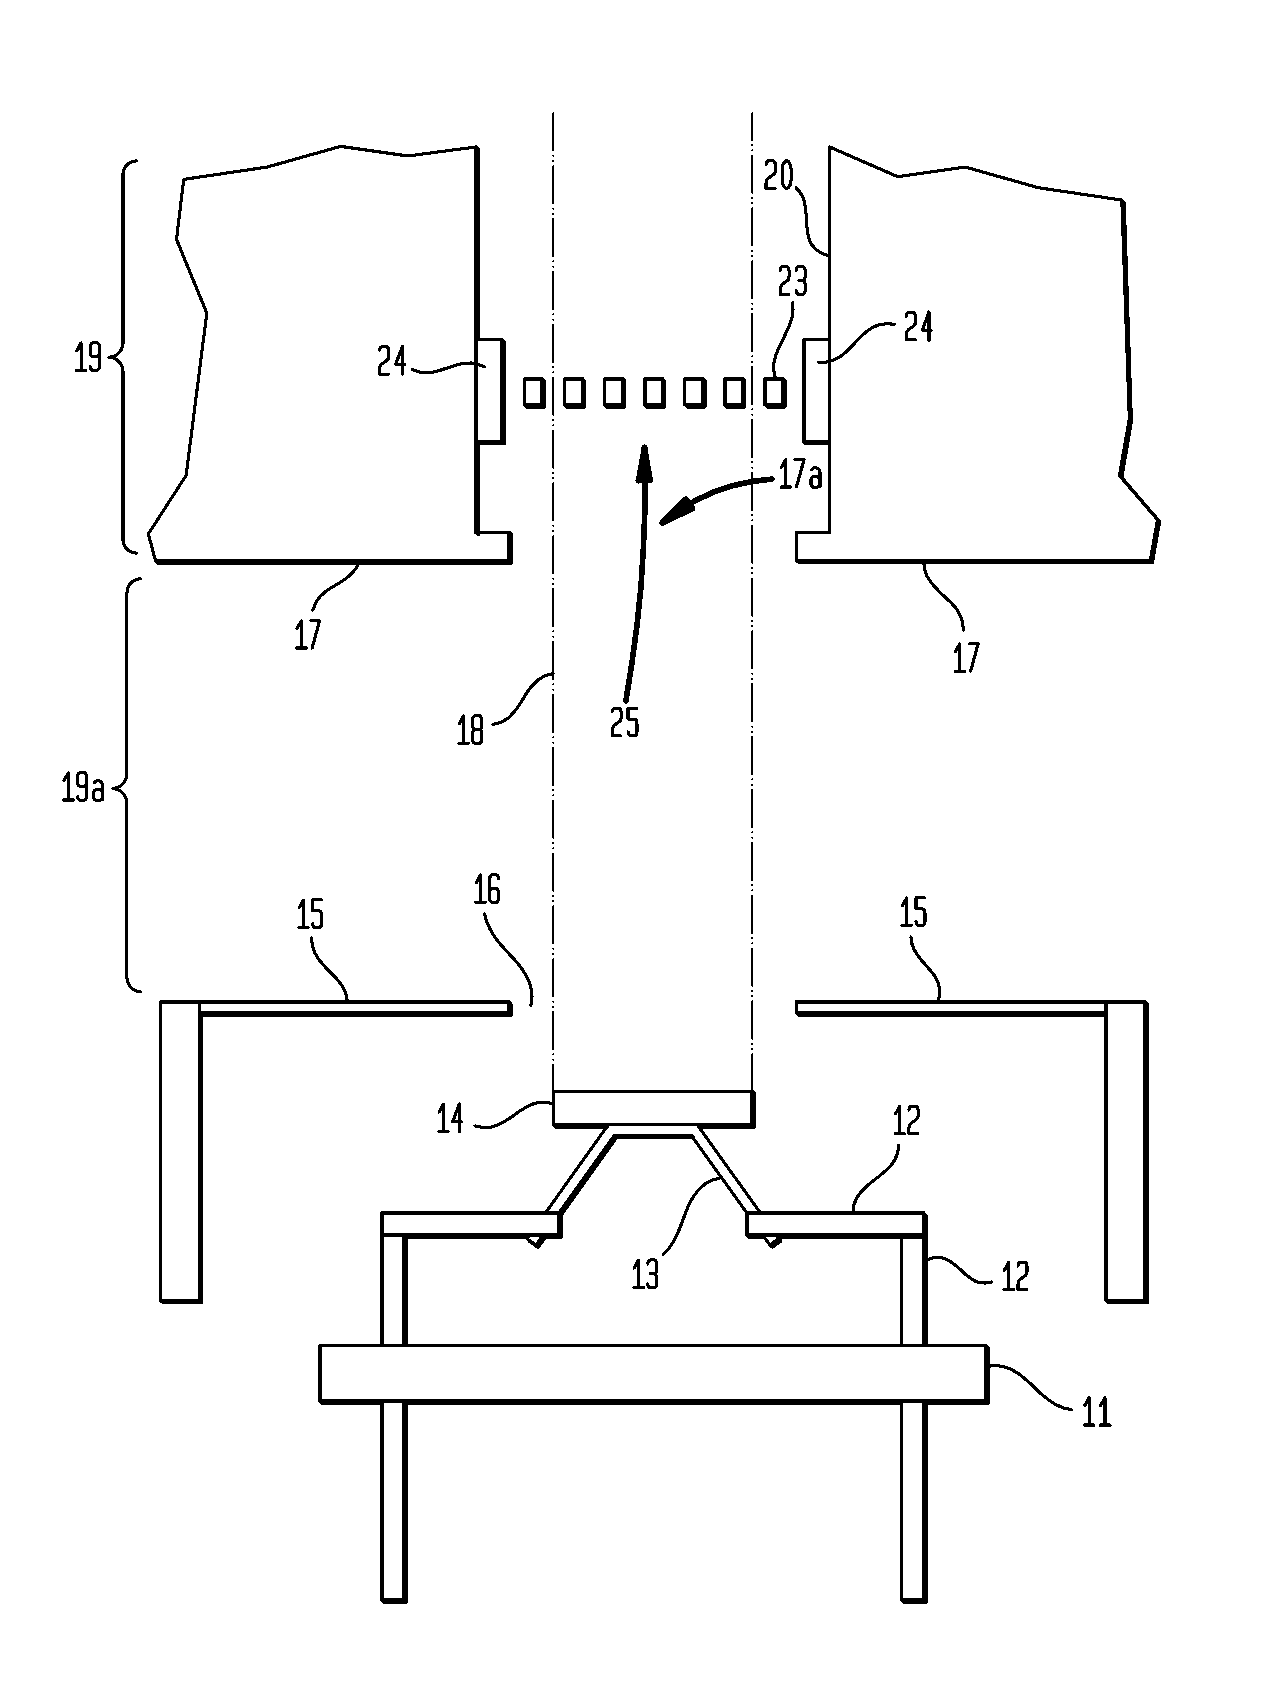 Lens array for electron beam lithography tool